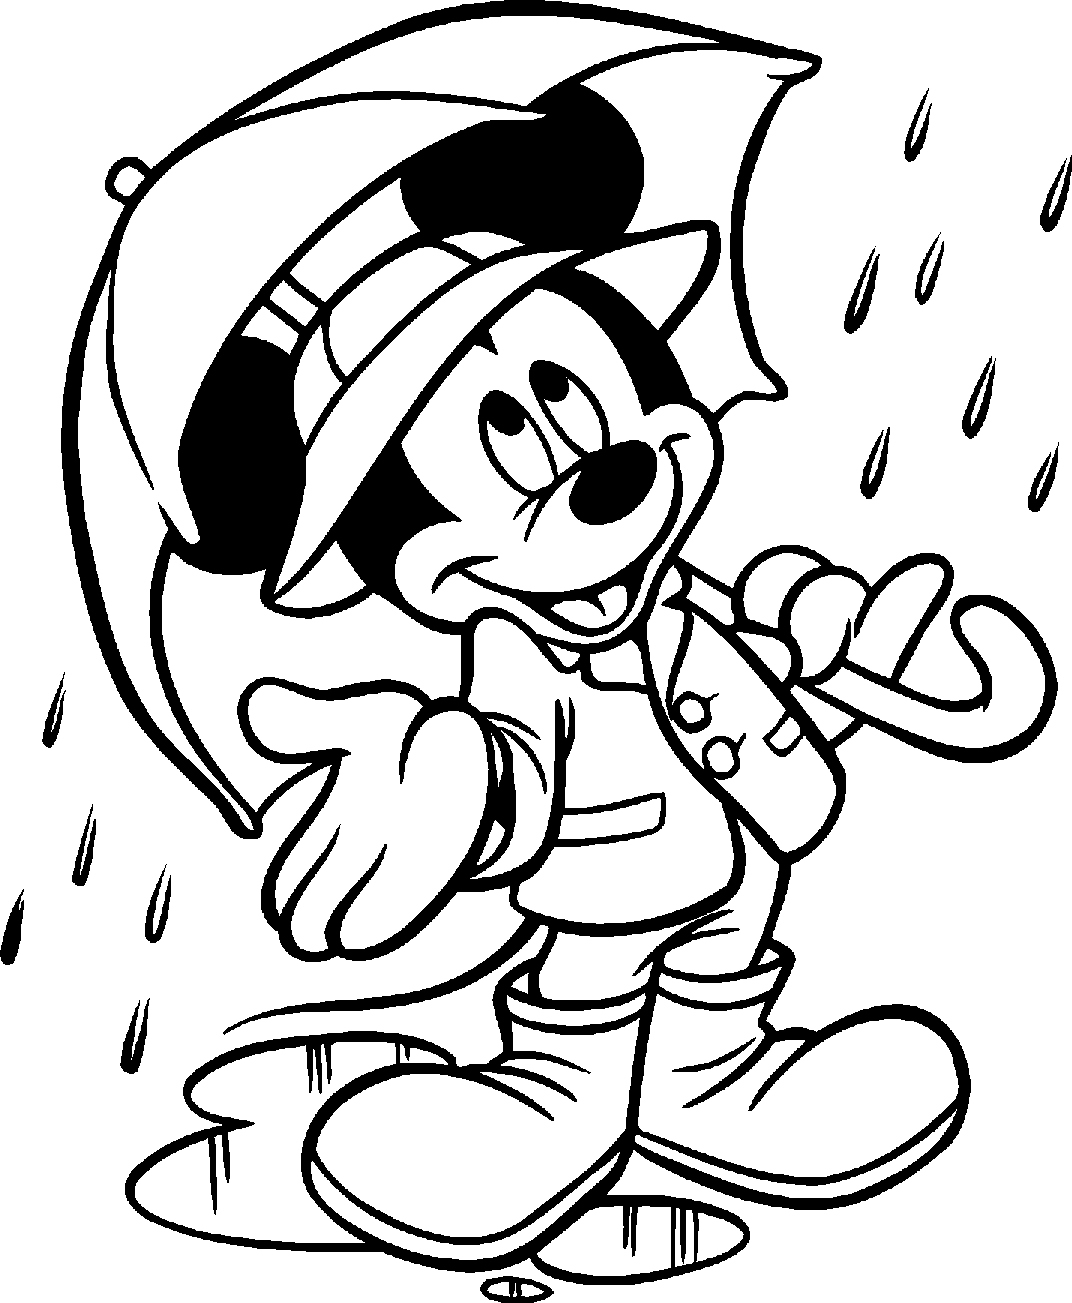 Cartoon Coloring Pages (17) Coloring Kids - Coloring Kids